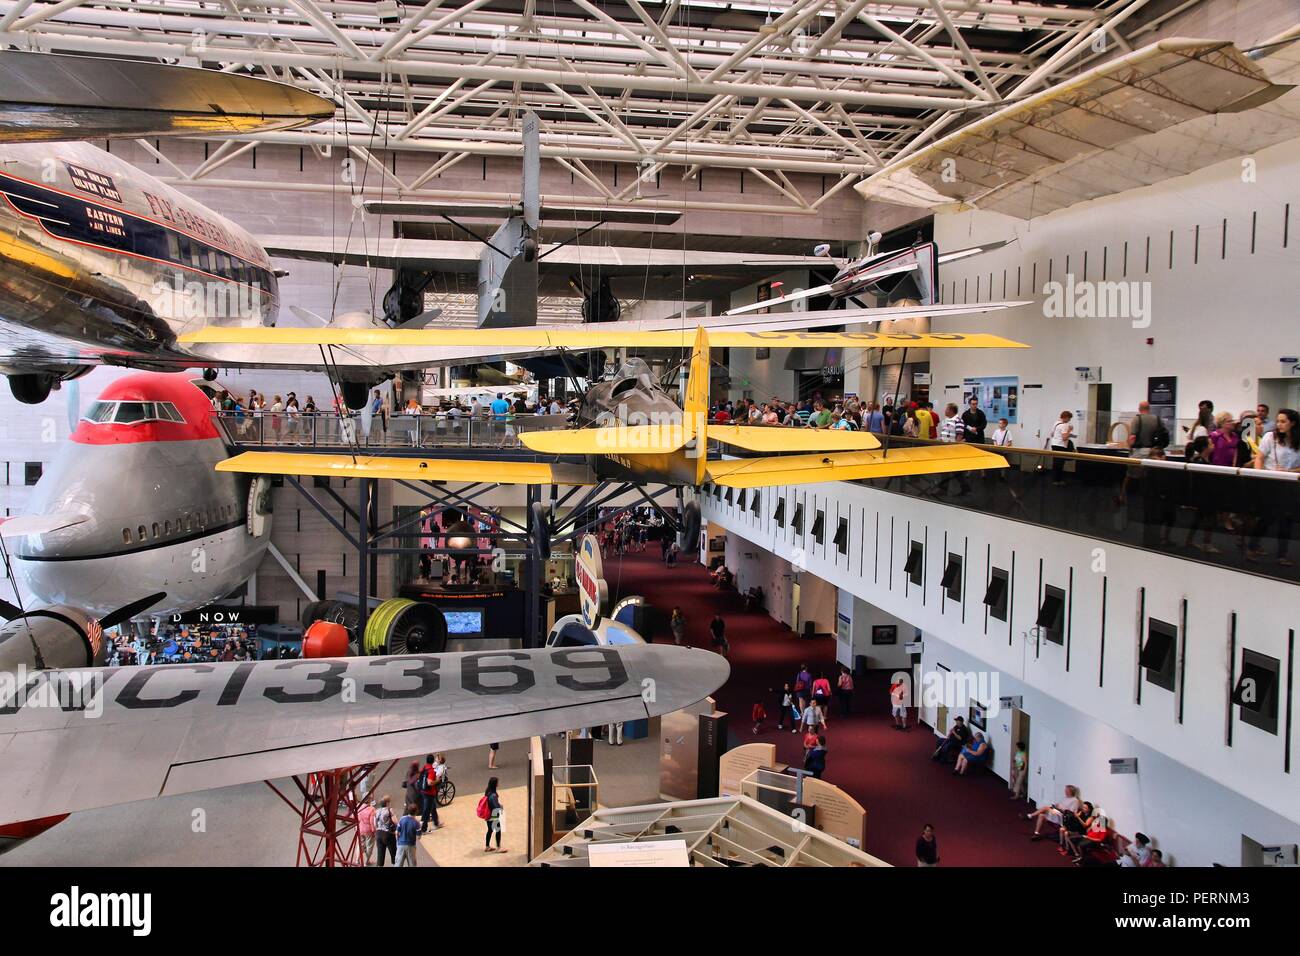 WASHINGTON - JUNE 13: People visit Smithsonian National Air and Space Museum on June 13, 2013 in Washington. It holds the largest collection of histor Stock Photo